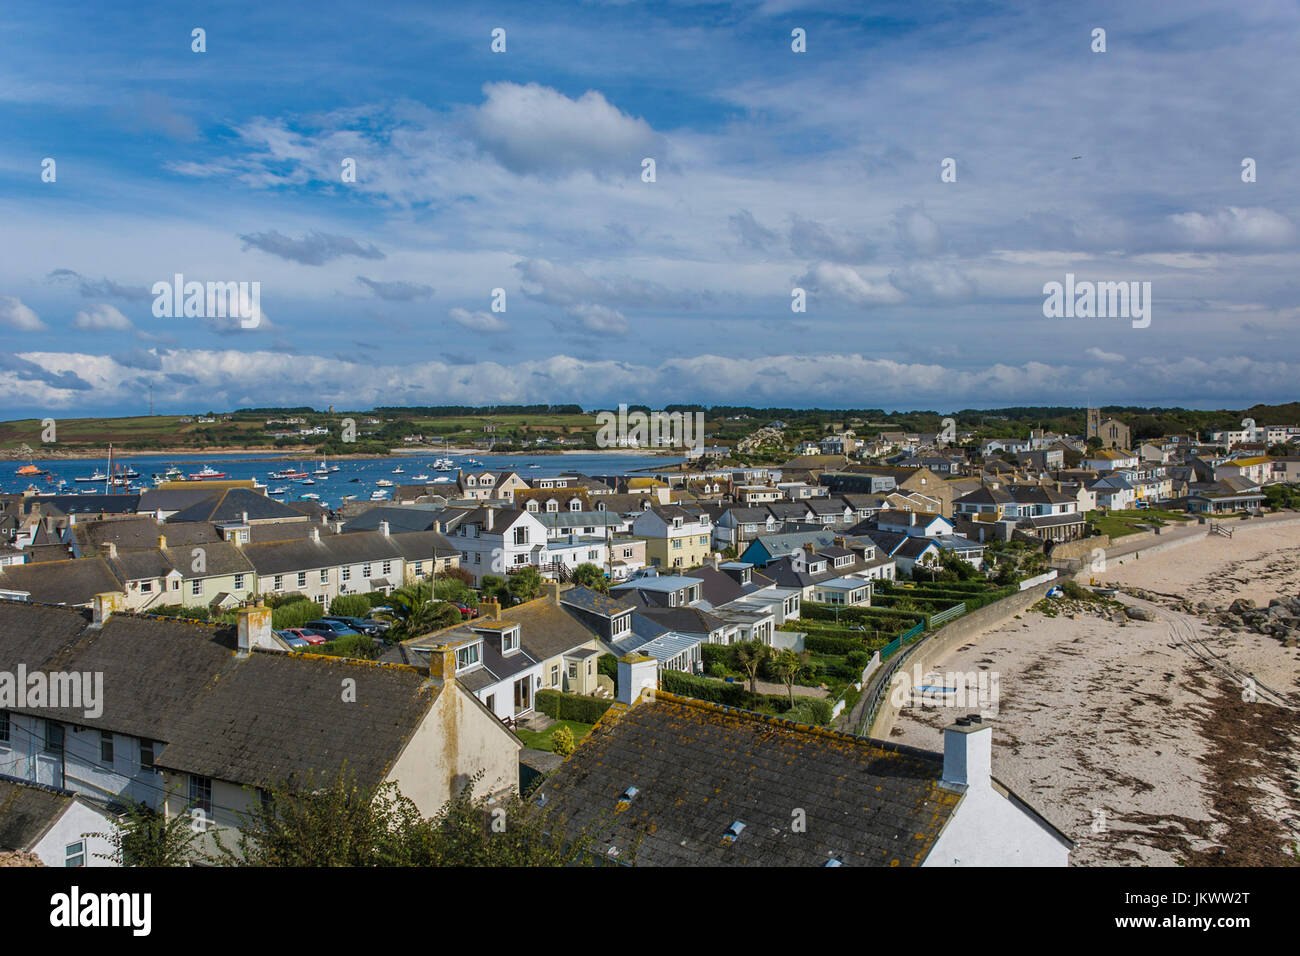 Isles of Scilly, Cornwall, England Stock Photo